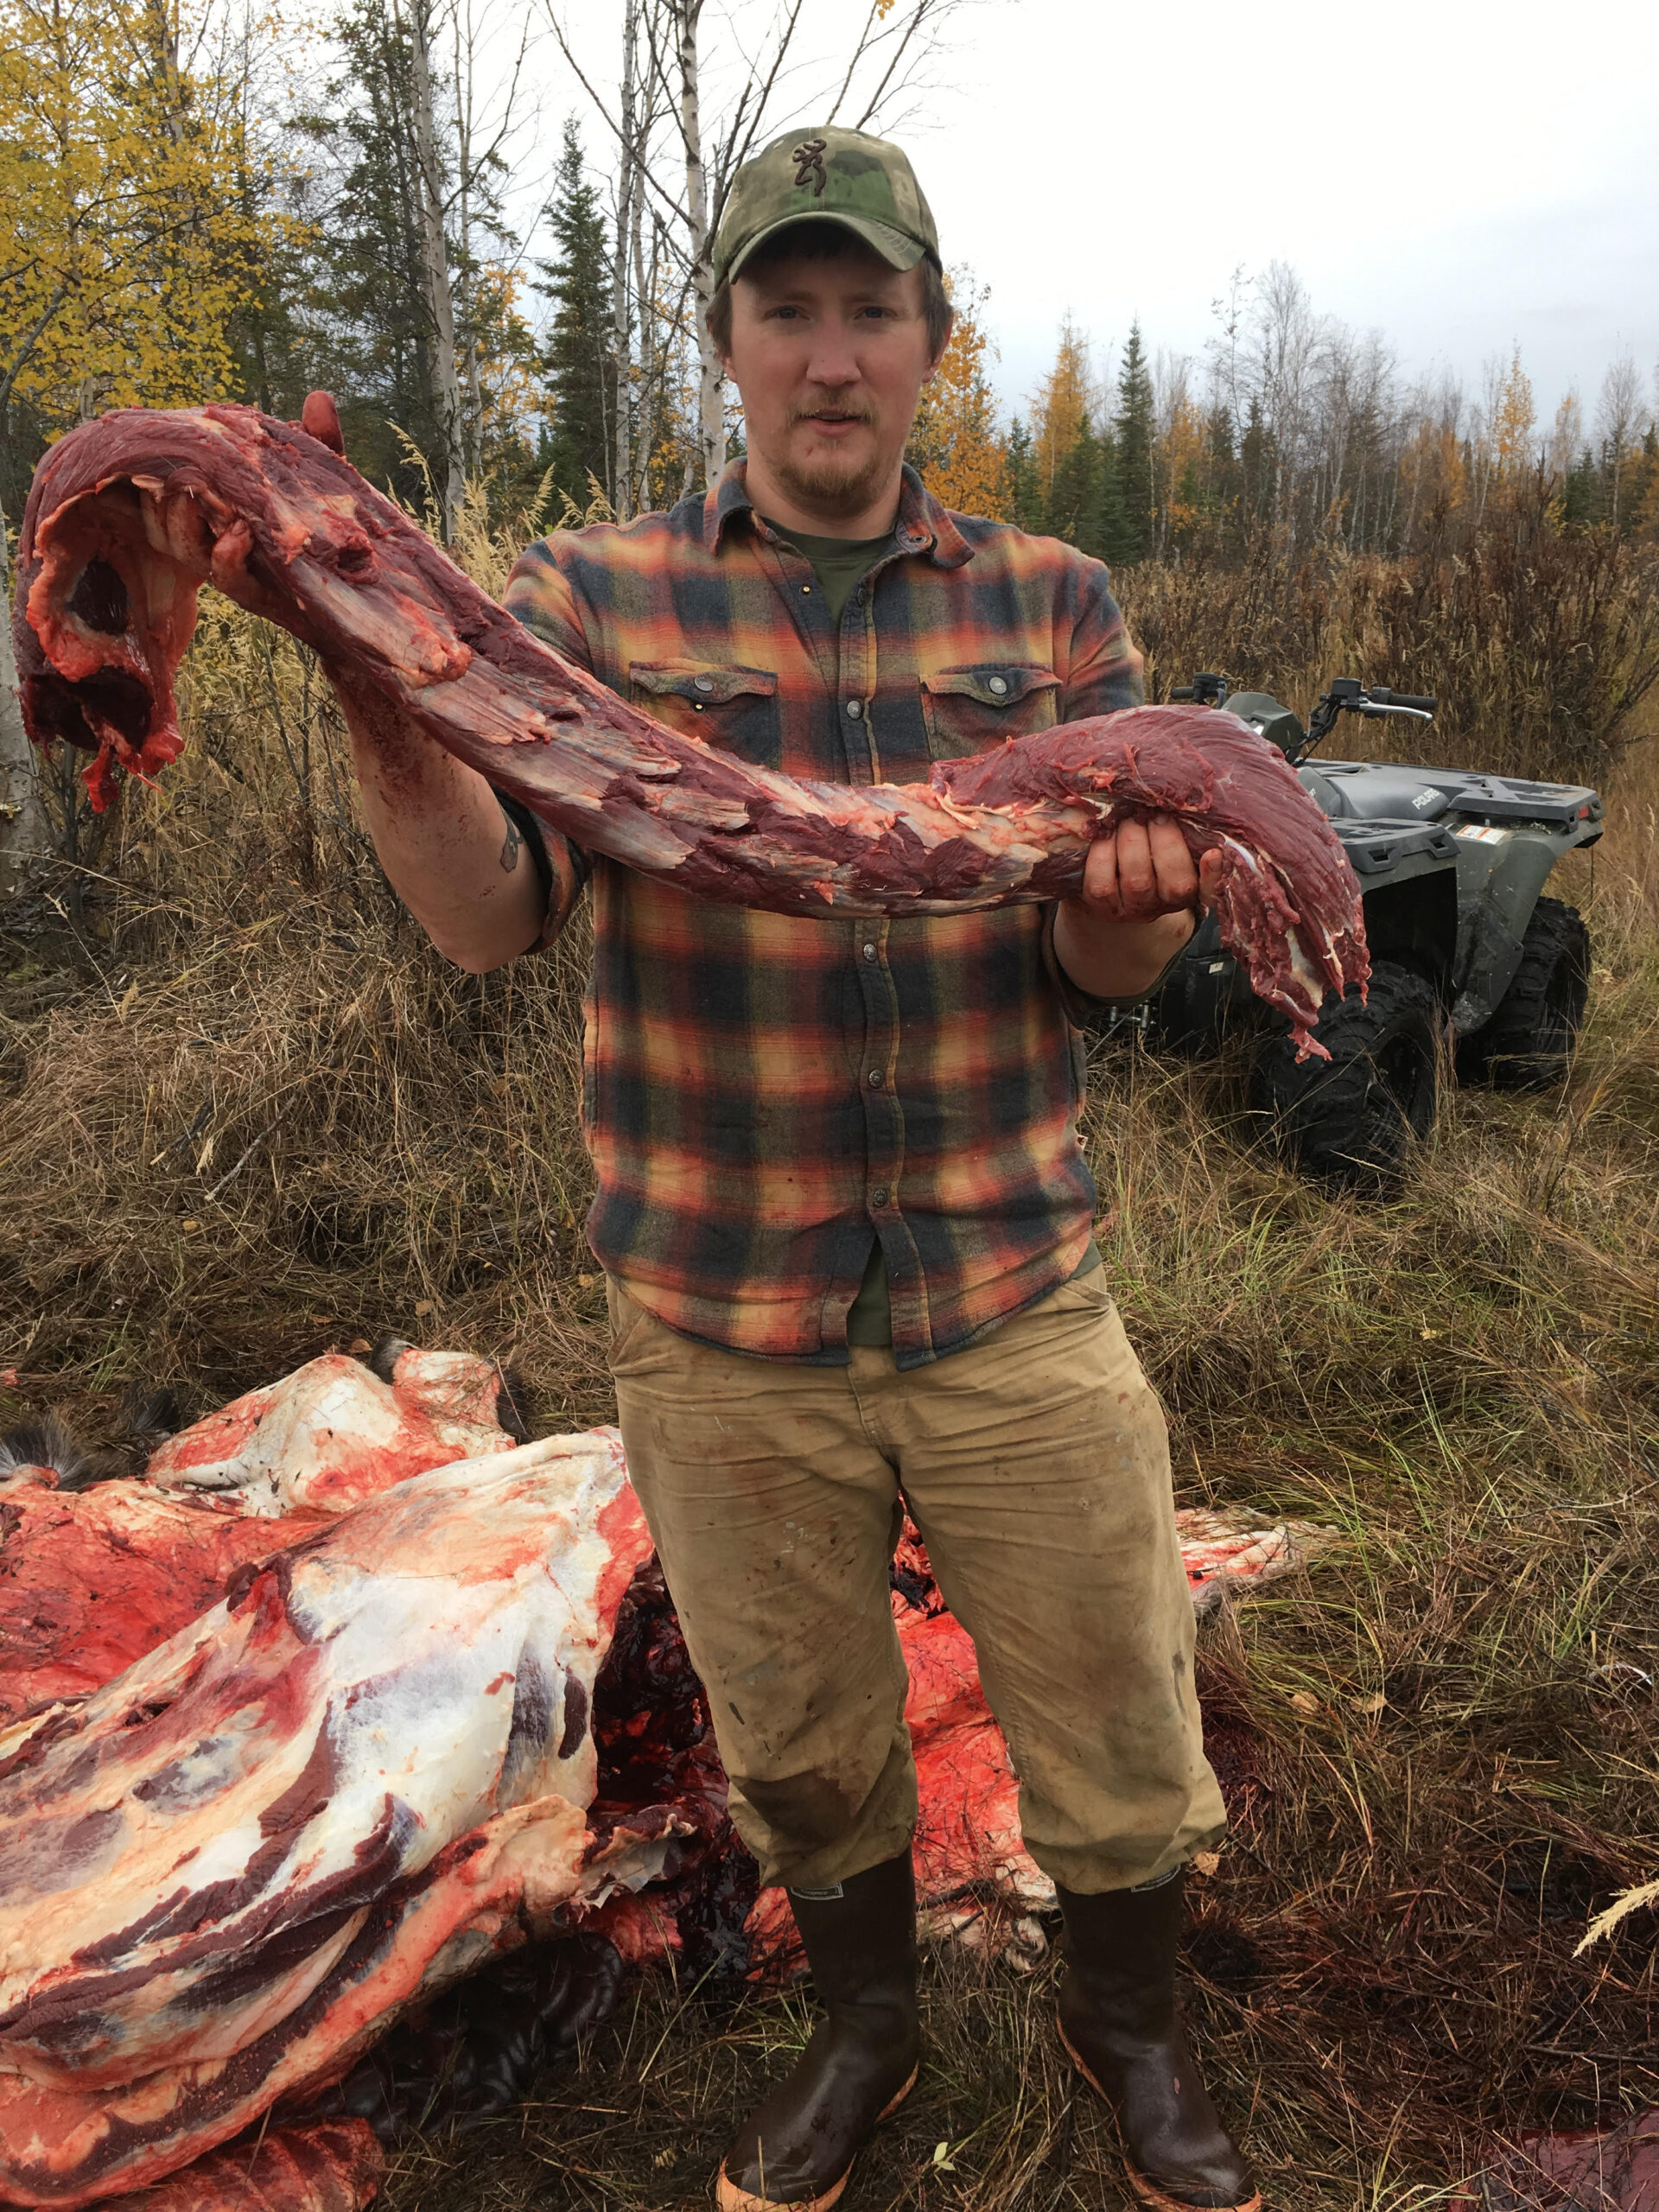 Butchering a moose is a tall order that takes plenty of effort and time.